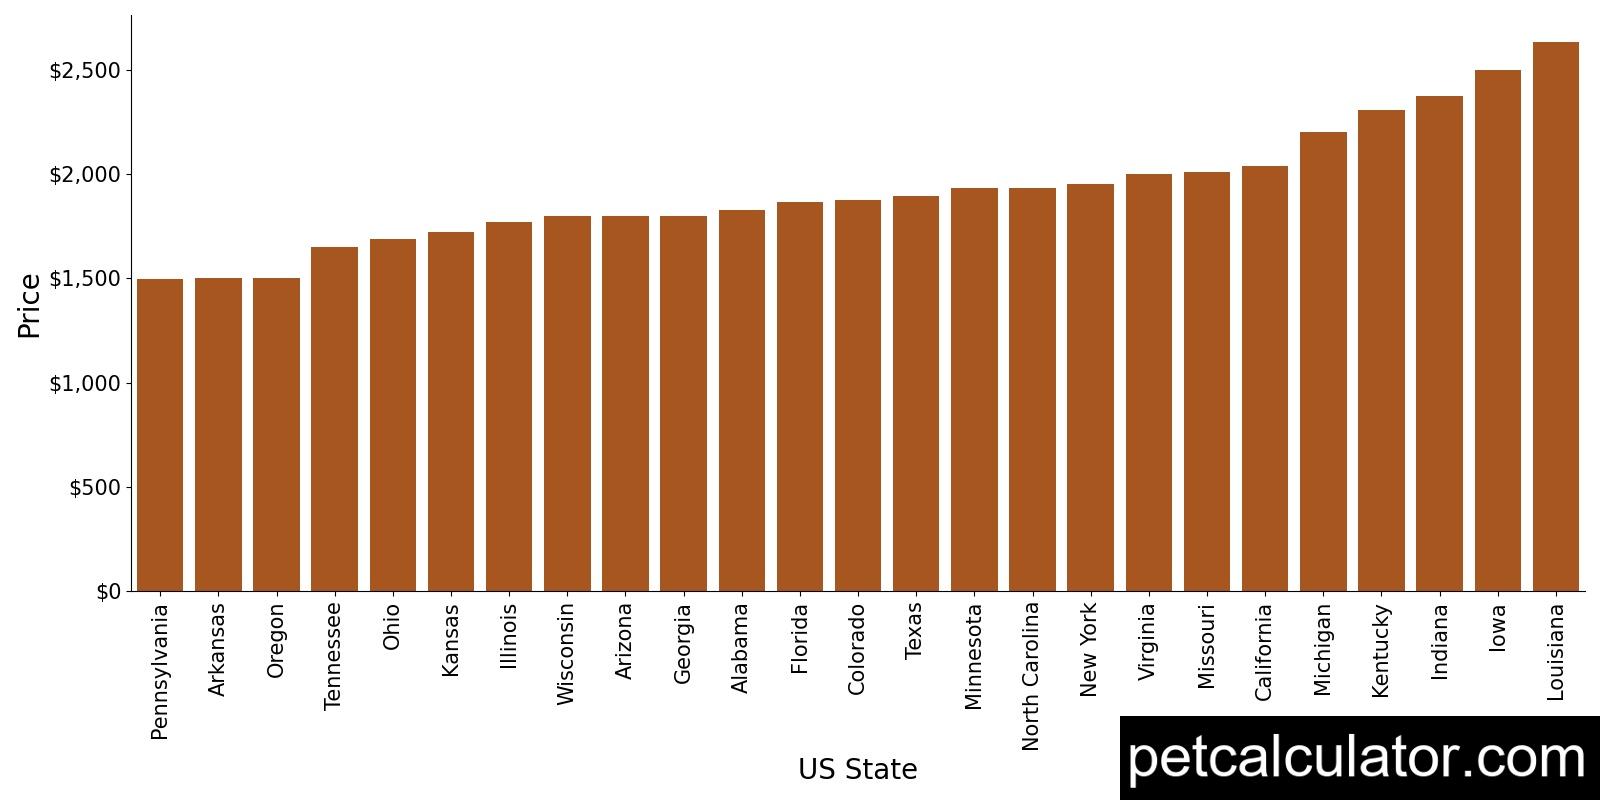 Price of Sheepadoodle by US State 